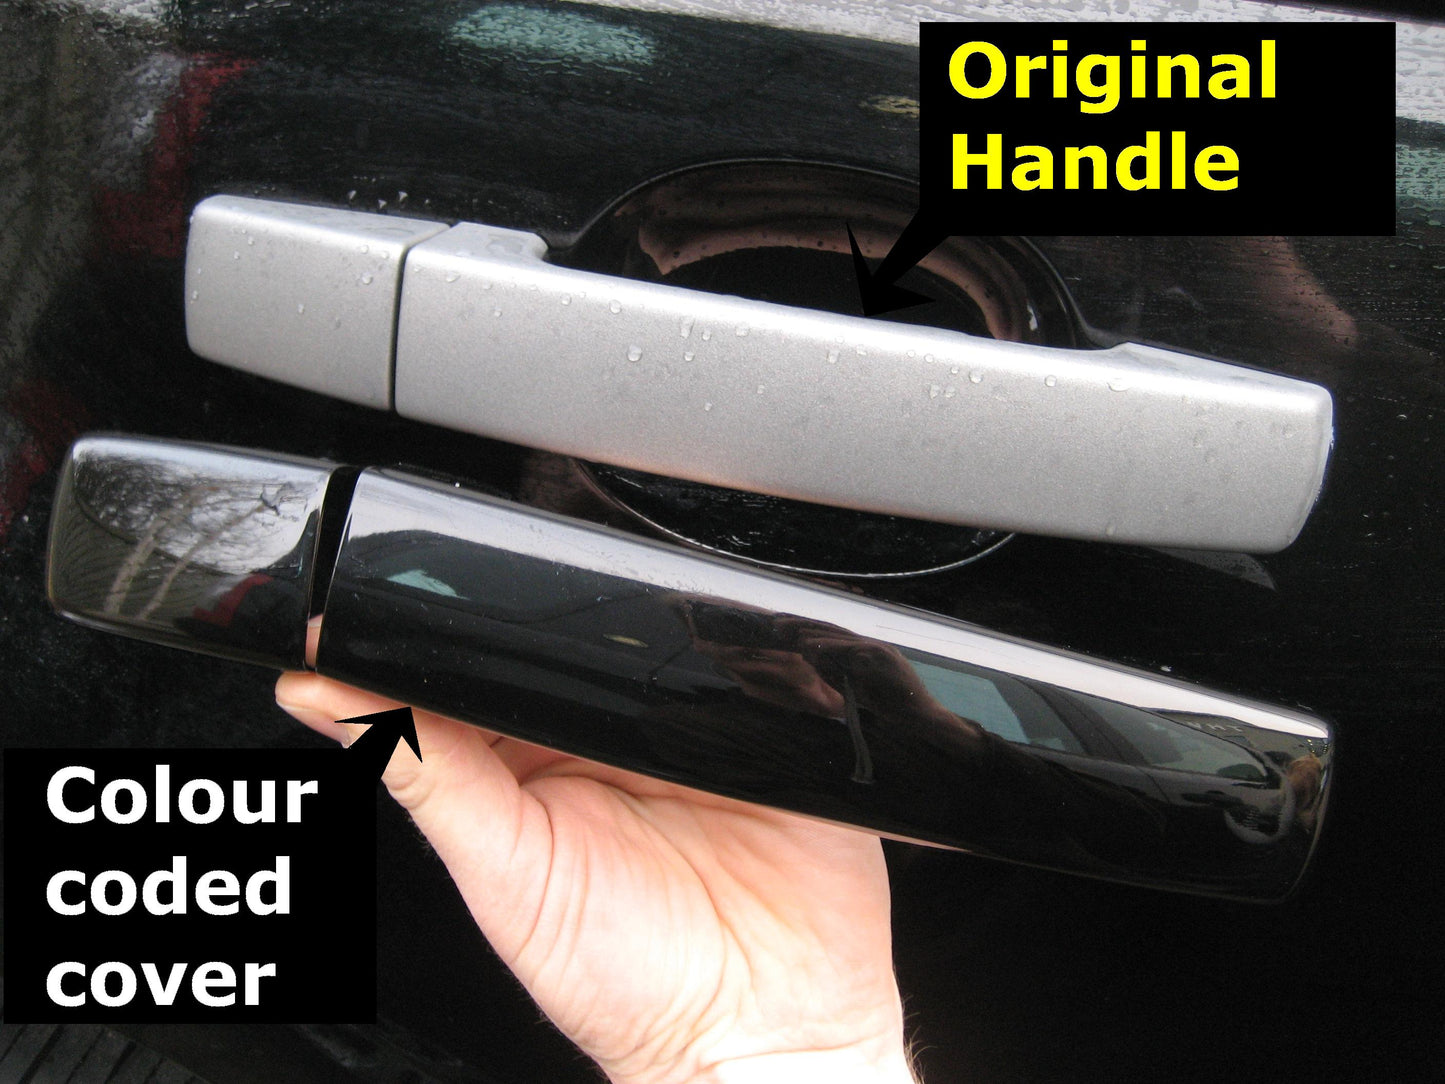 Door Handle Covers for Range Rover Sport L320 fitted with 2 pc Handles  - Java Black